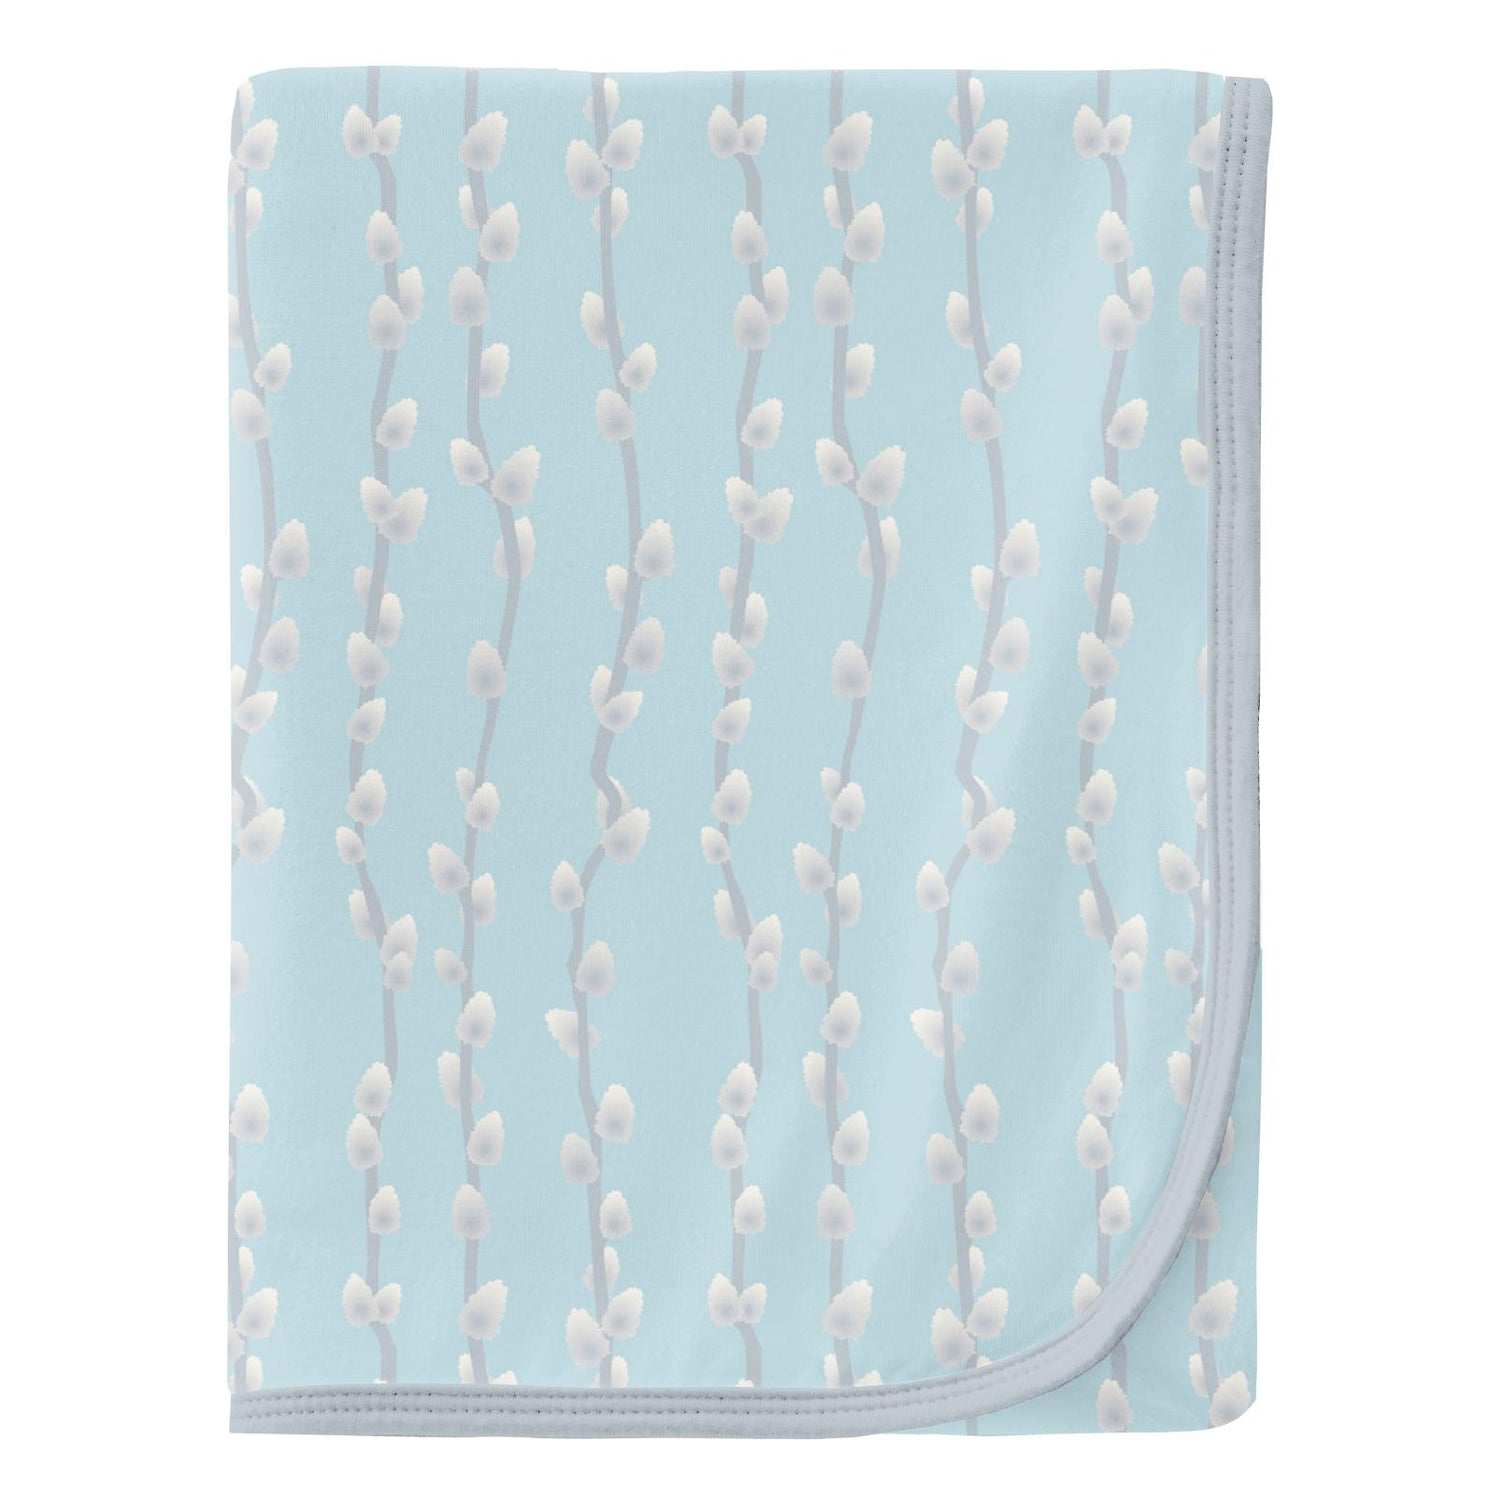 Print Swaddling Blanket in Spring Sky Pussy Willows